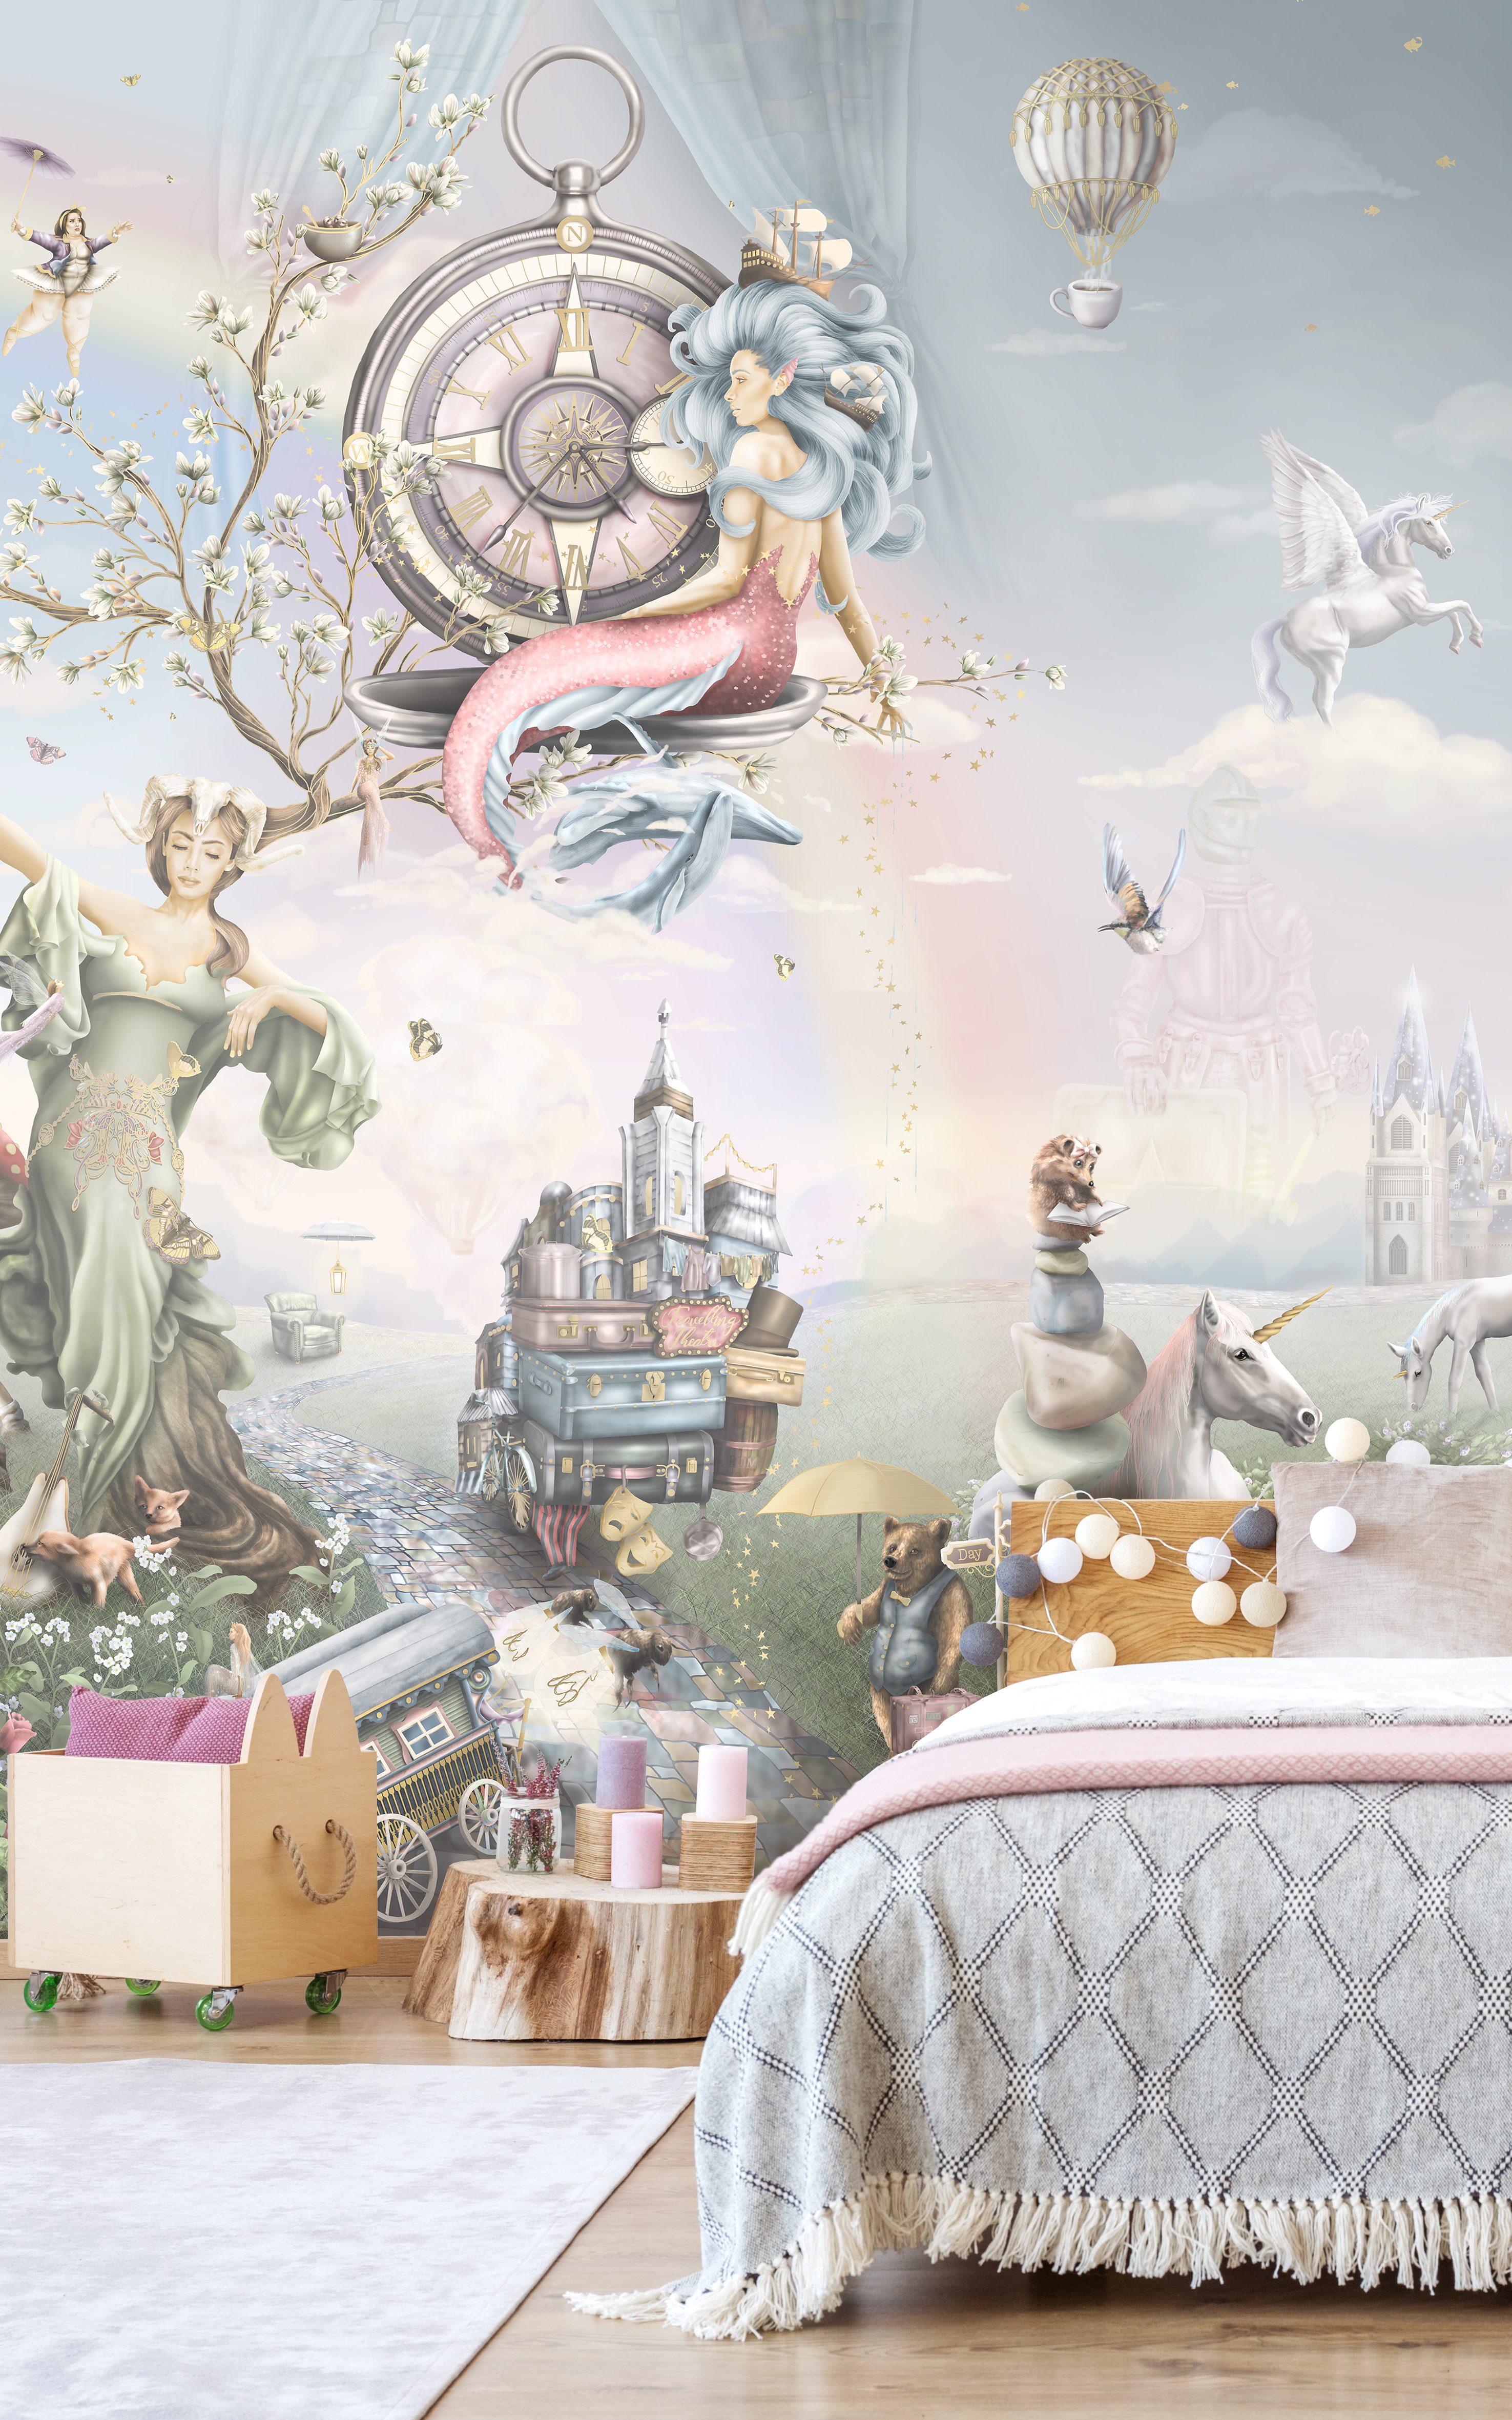 Removable Wallpaper,Magical Castle,Nursery,Fairy Tale,Wall Mural,Self  Adhesive or Vinyl .br